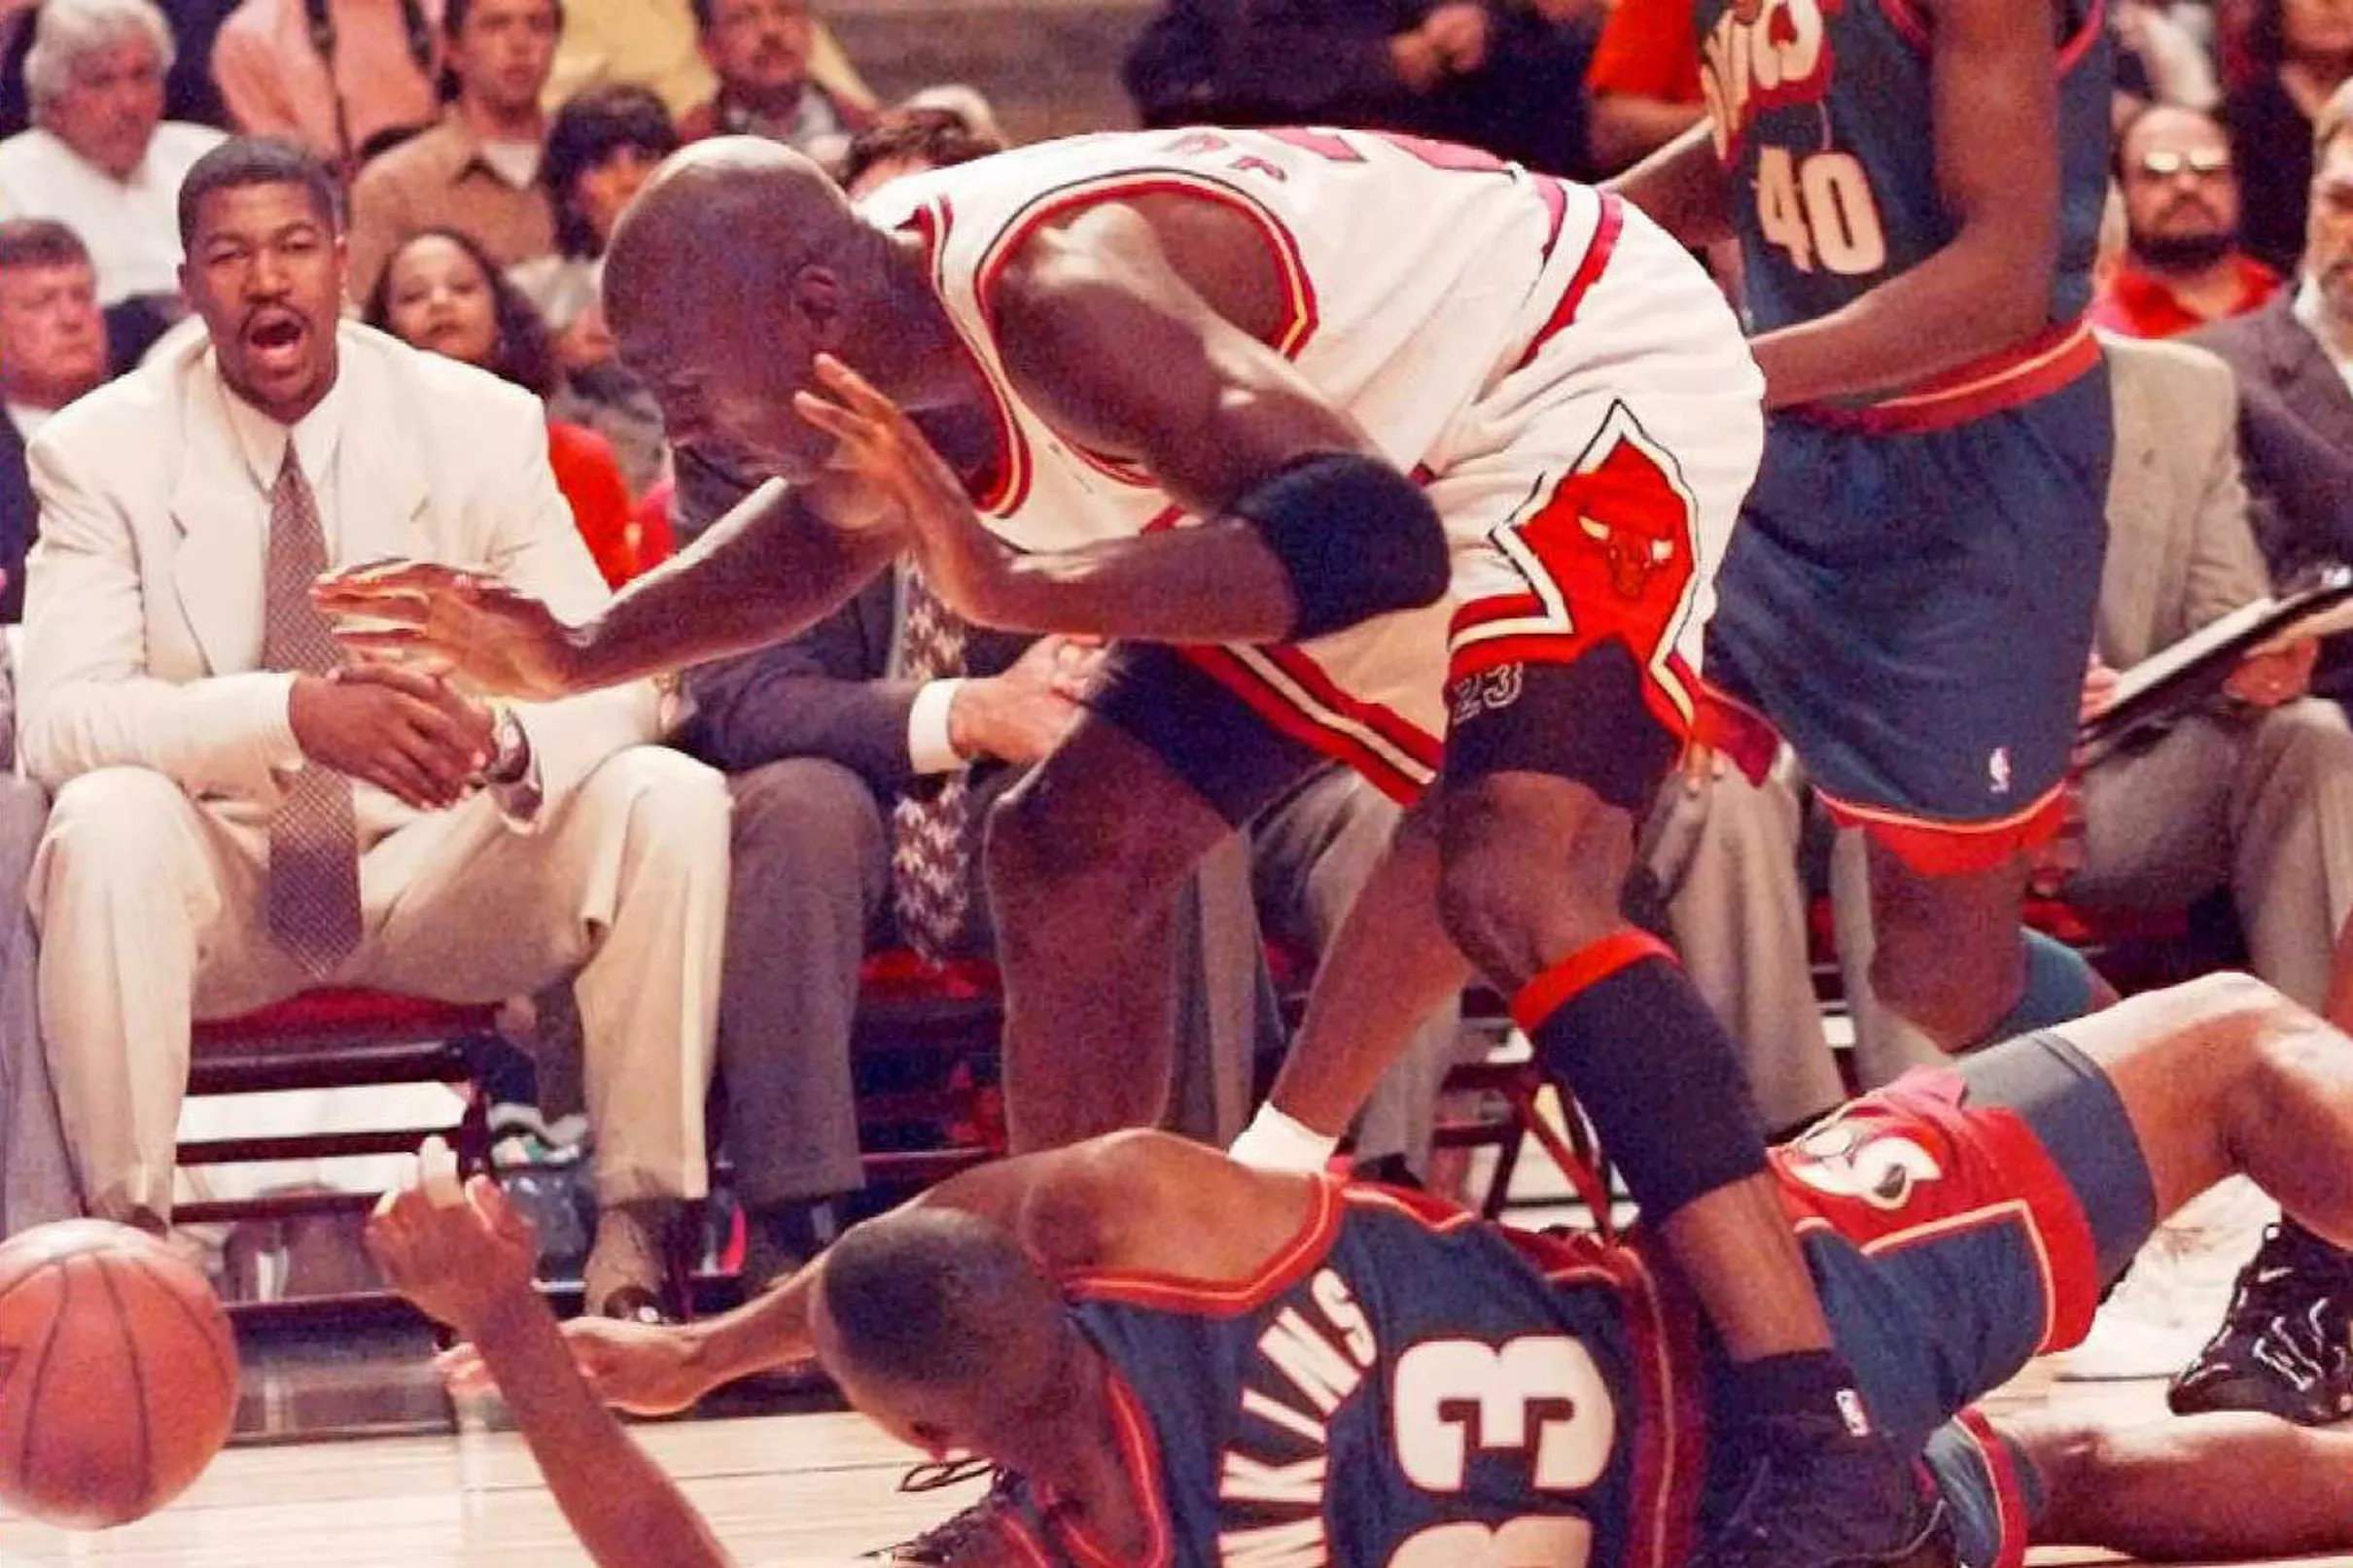 Better basketball: 1990s Bulls or today’s game? All the answers are